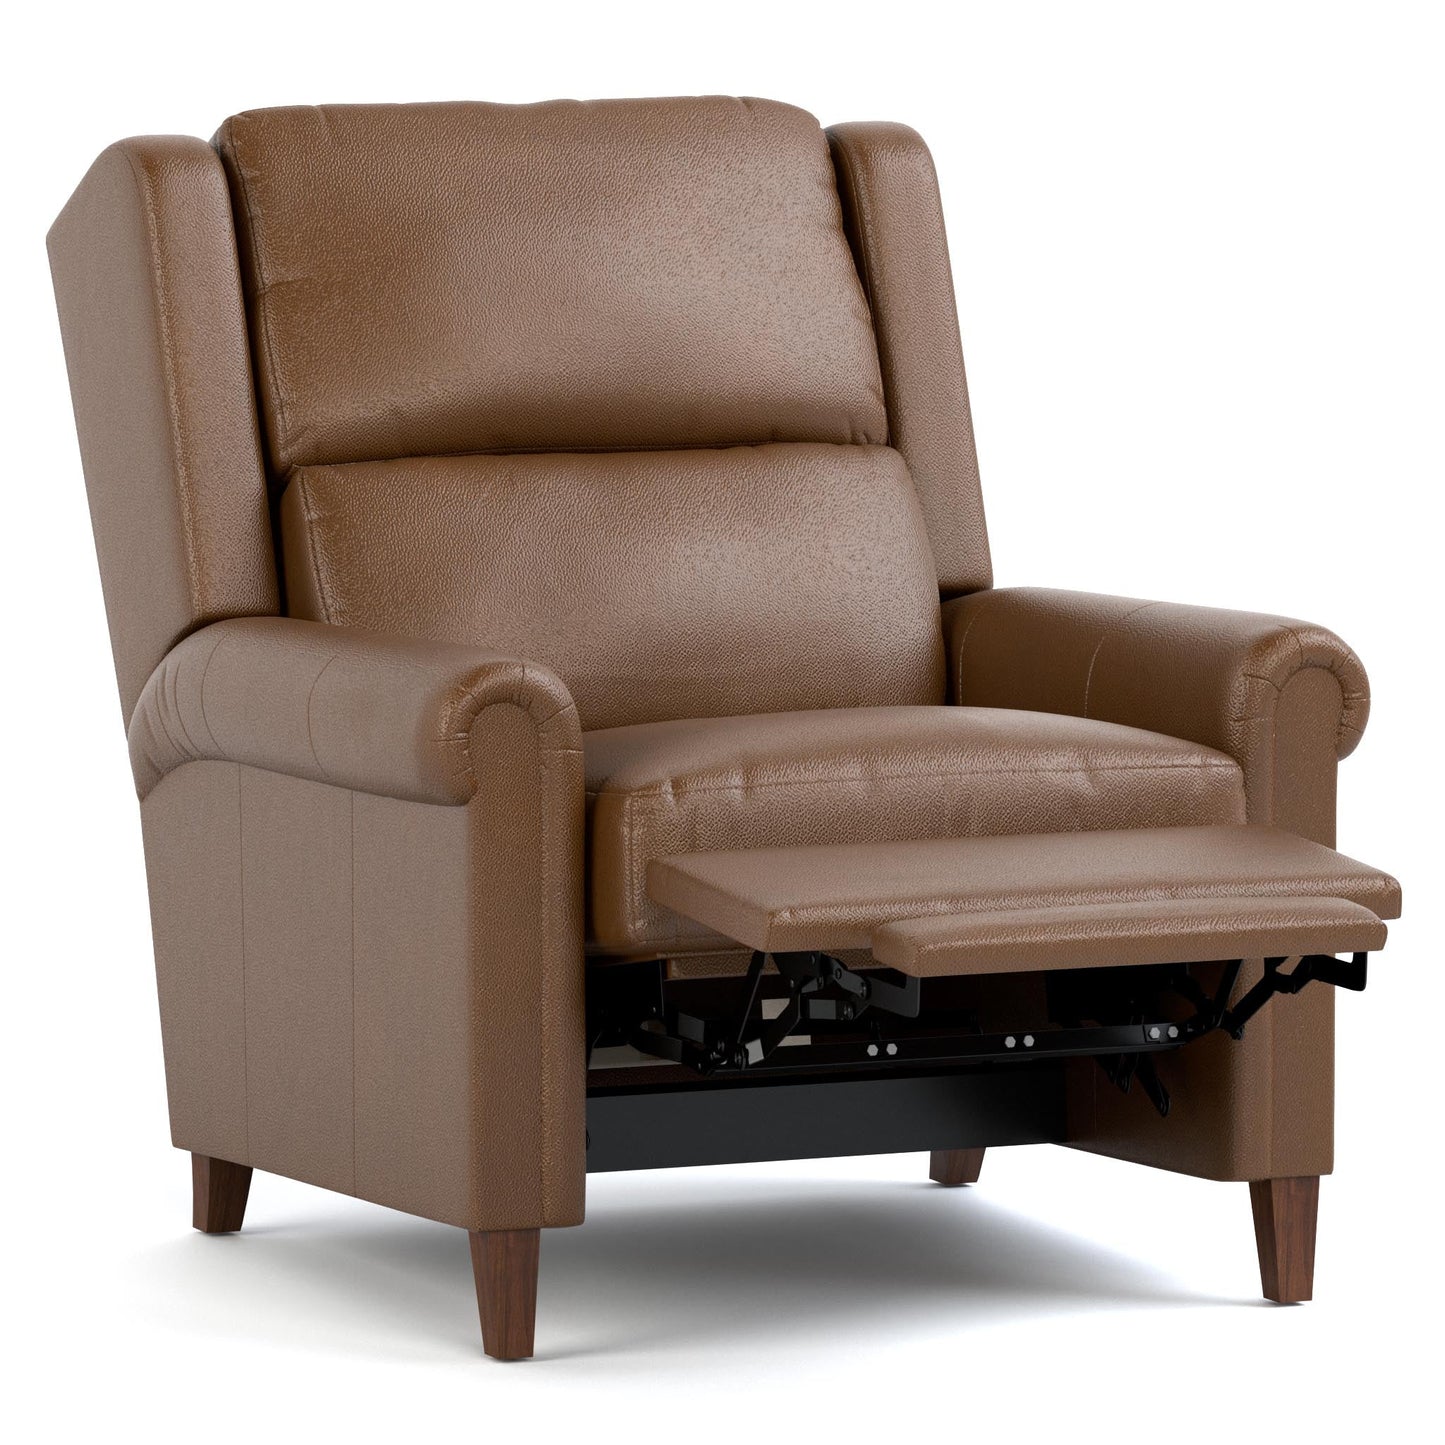 Woodlands Small Roll Arm Manual Recliner Selvano Bark - Angle Reclined